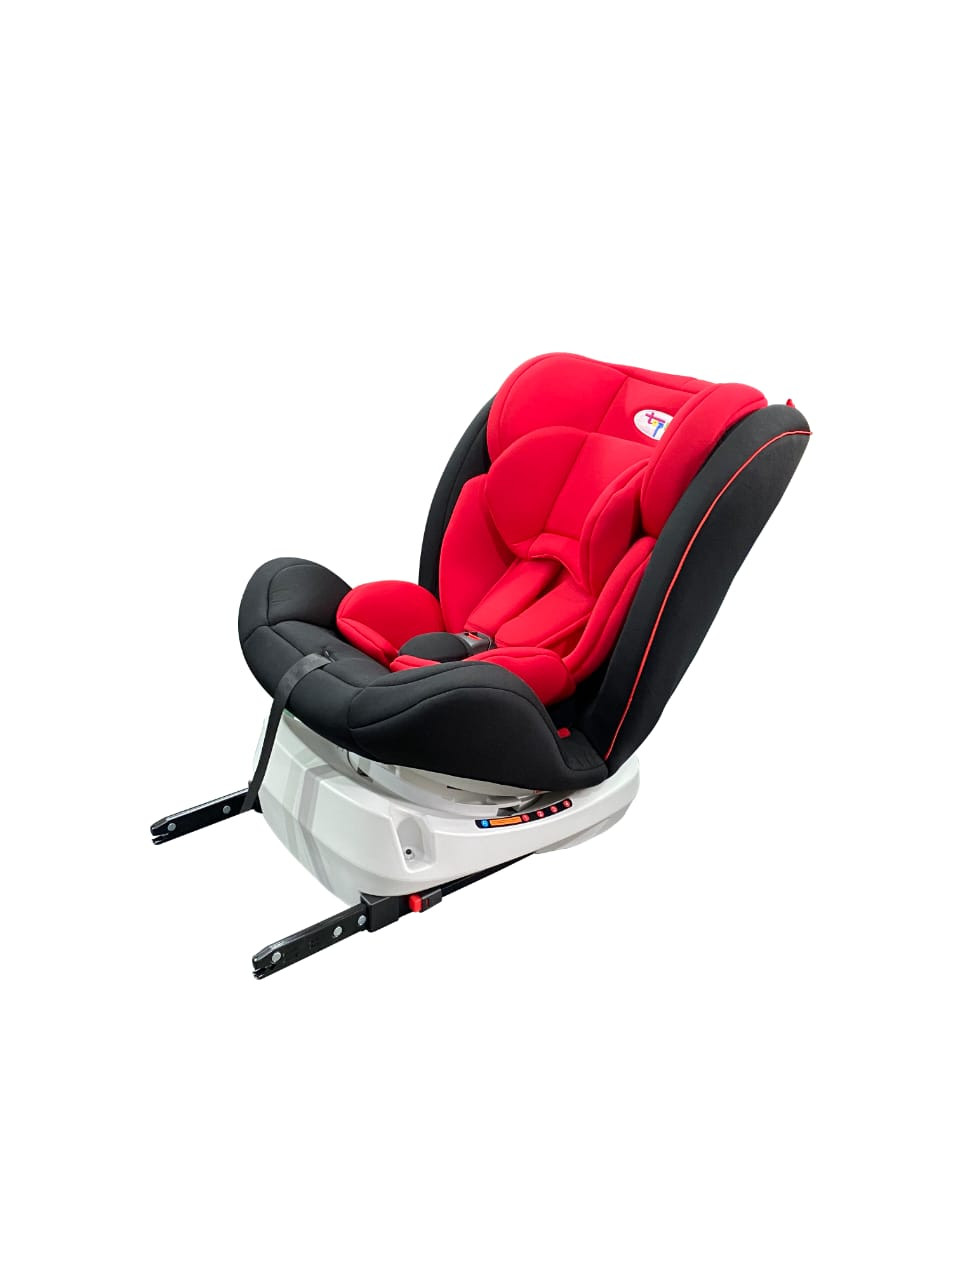 TOP 2 ISOFIX BABY CAR SEAT - 360 DEGREES ROTATION (UP TO 12YRS)